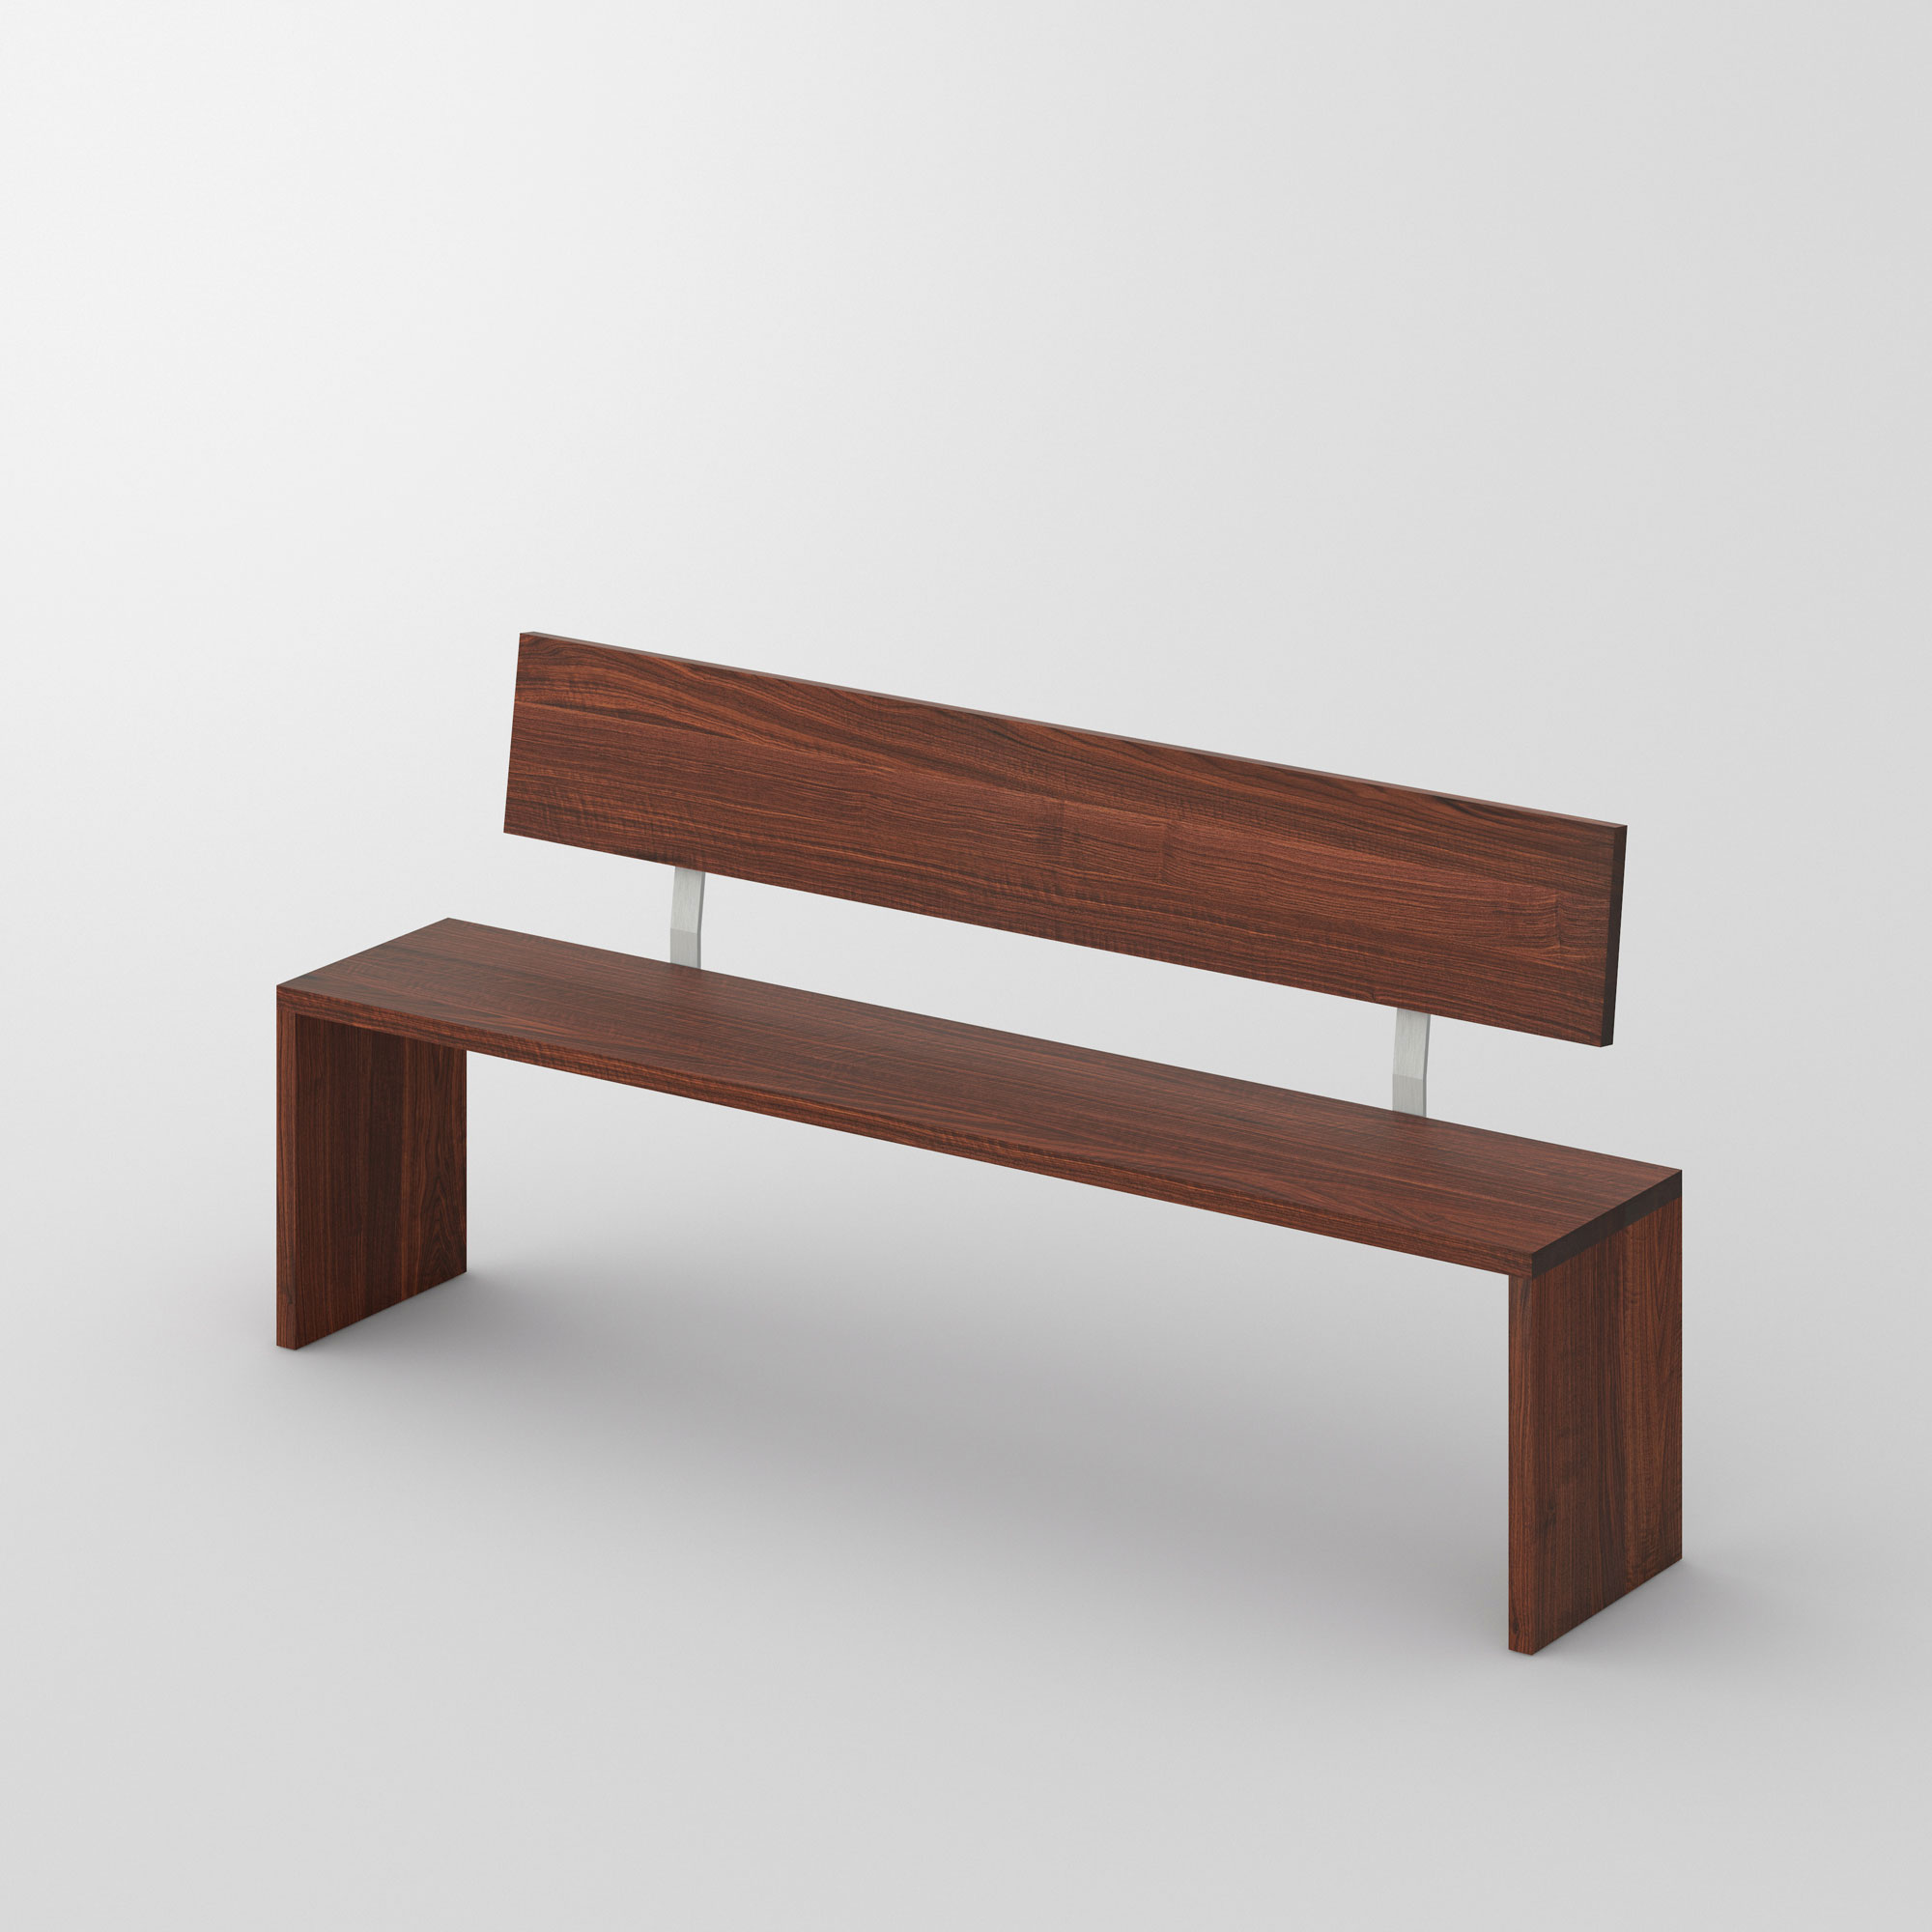 Solid Wood Bench MENA 3 cam1 custom made in solid wood by vitamin design